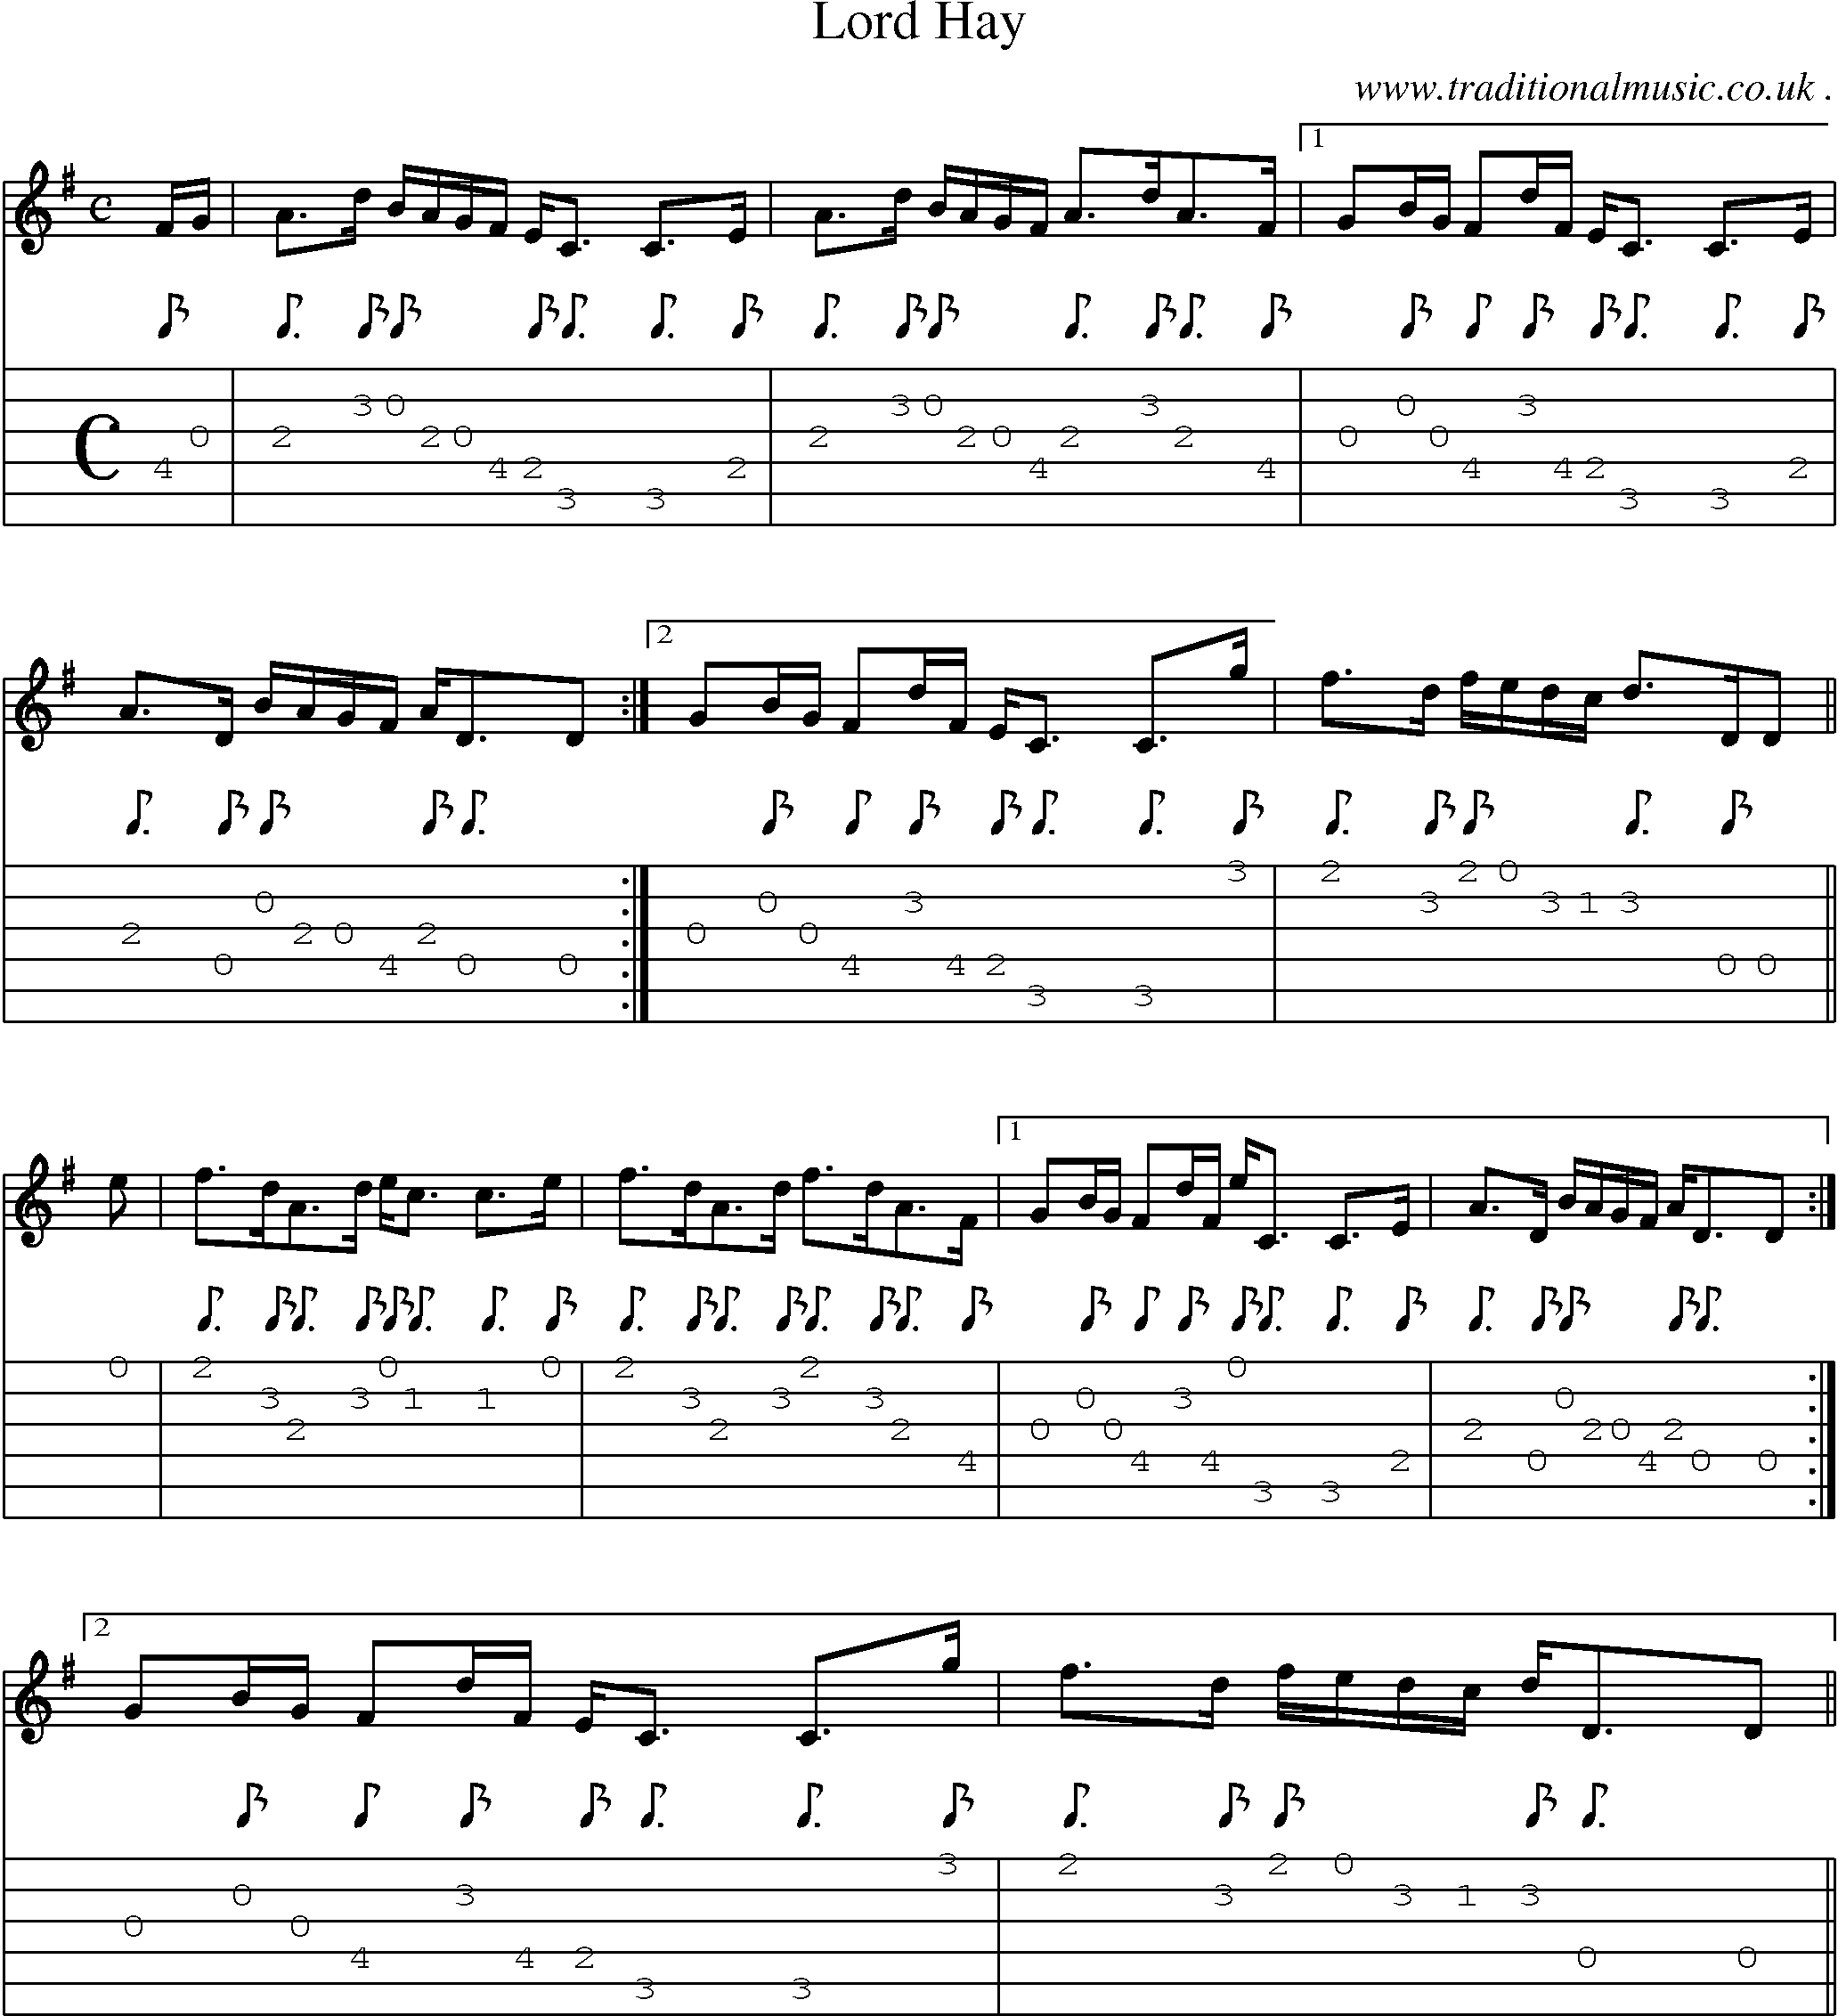 Sheet-music  score, Chords and Guitar Tabs for Lord Hay